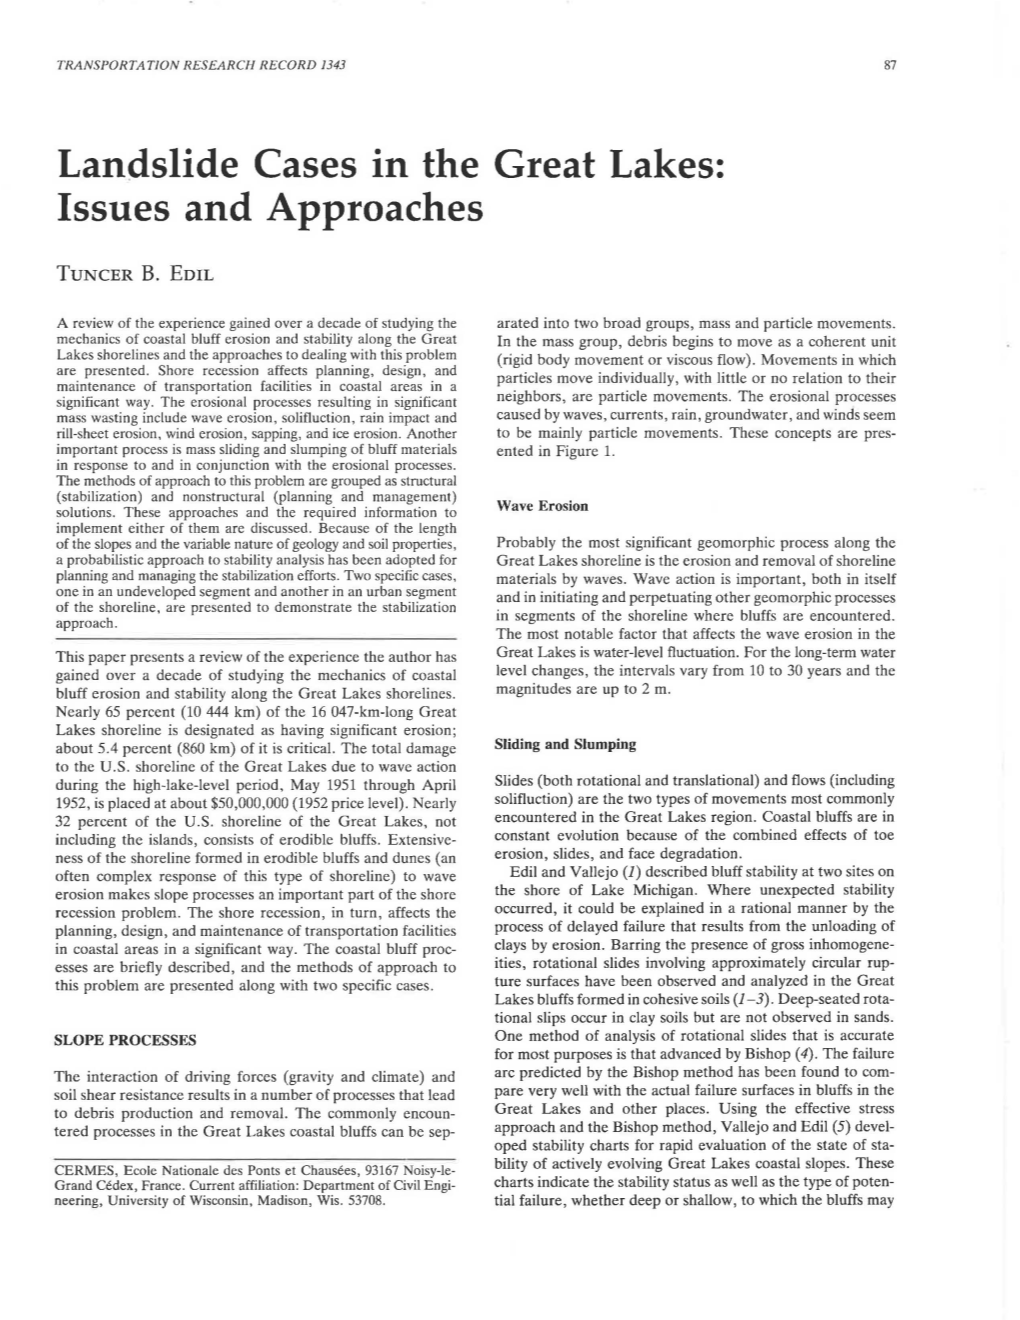 Landslide Cases in the Great Lakes: Issues and Approaches